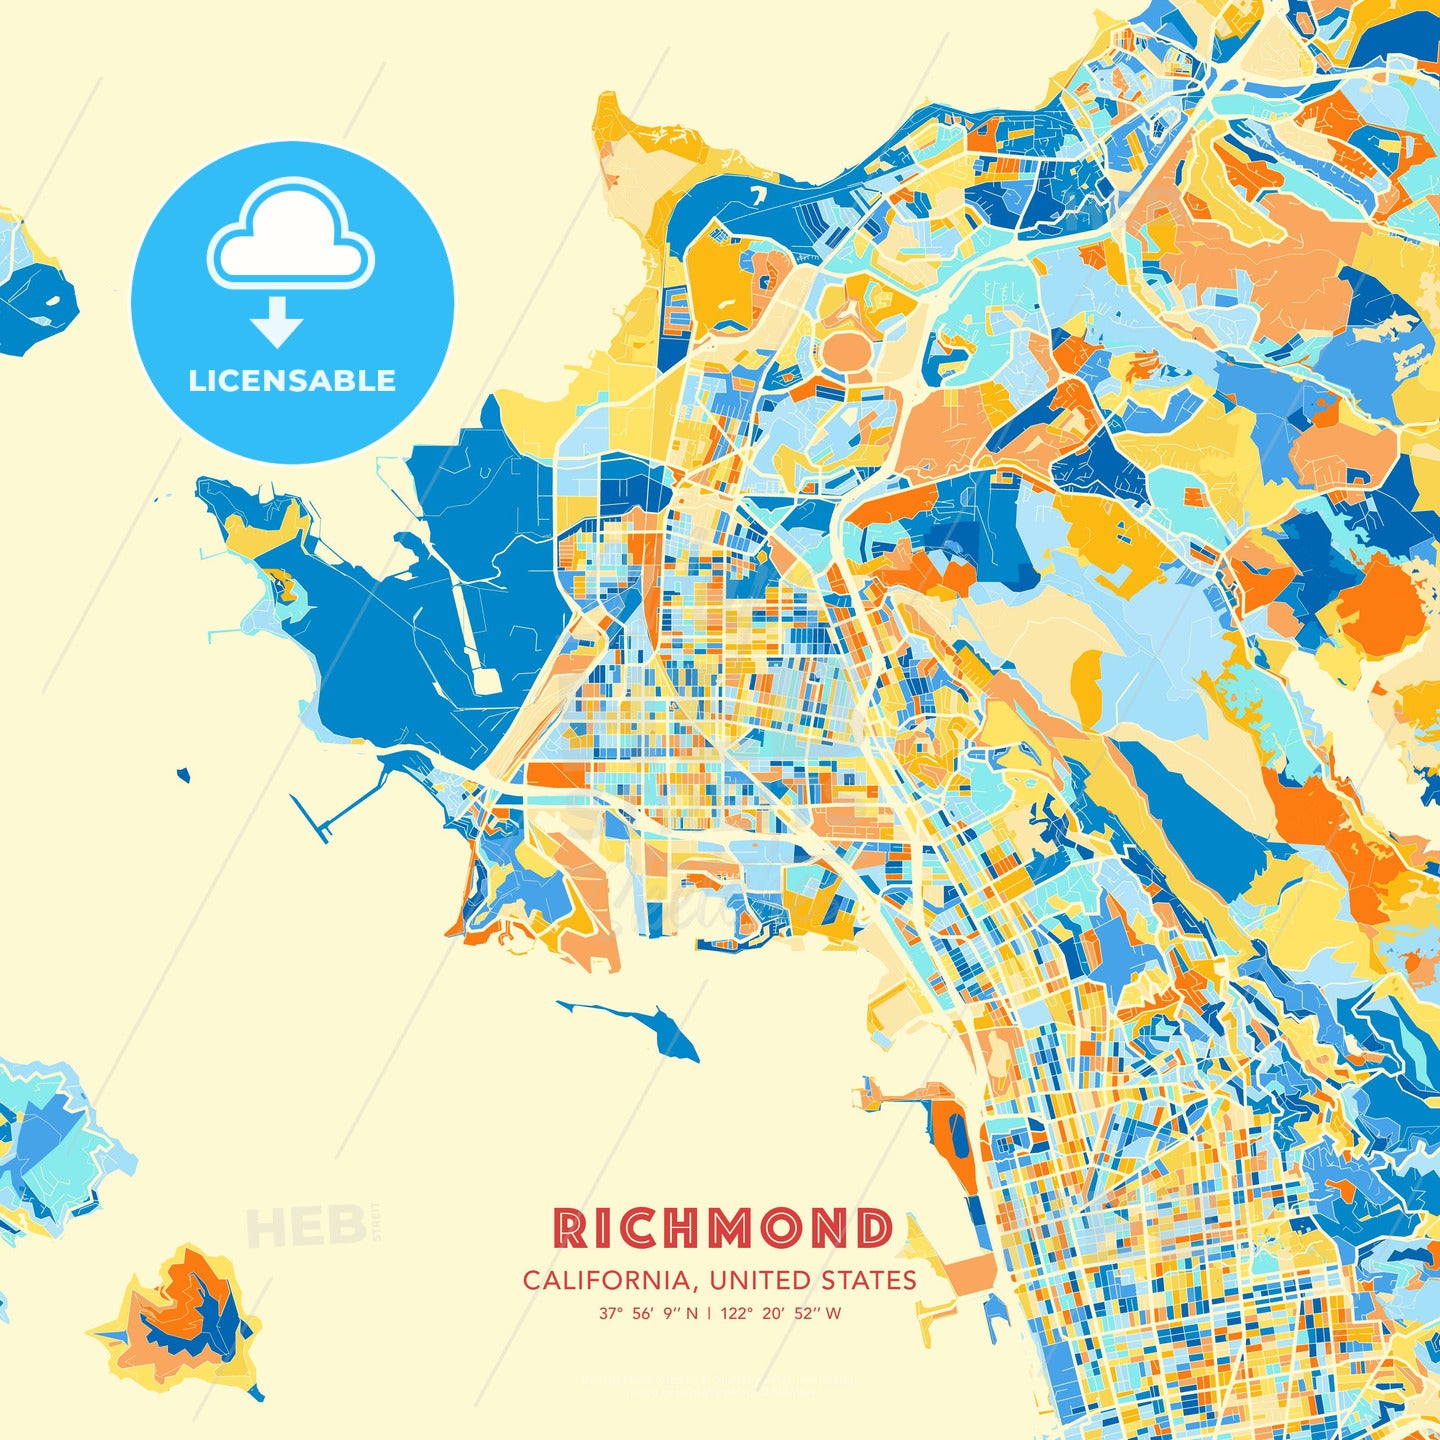 Richmond, California, United States, map - HEBSTREITS Sketches